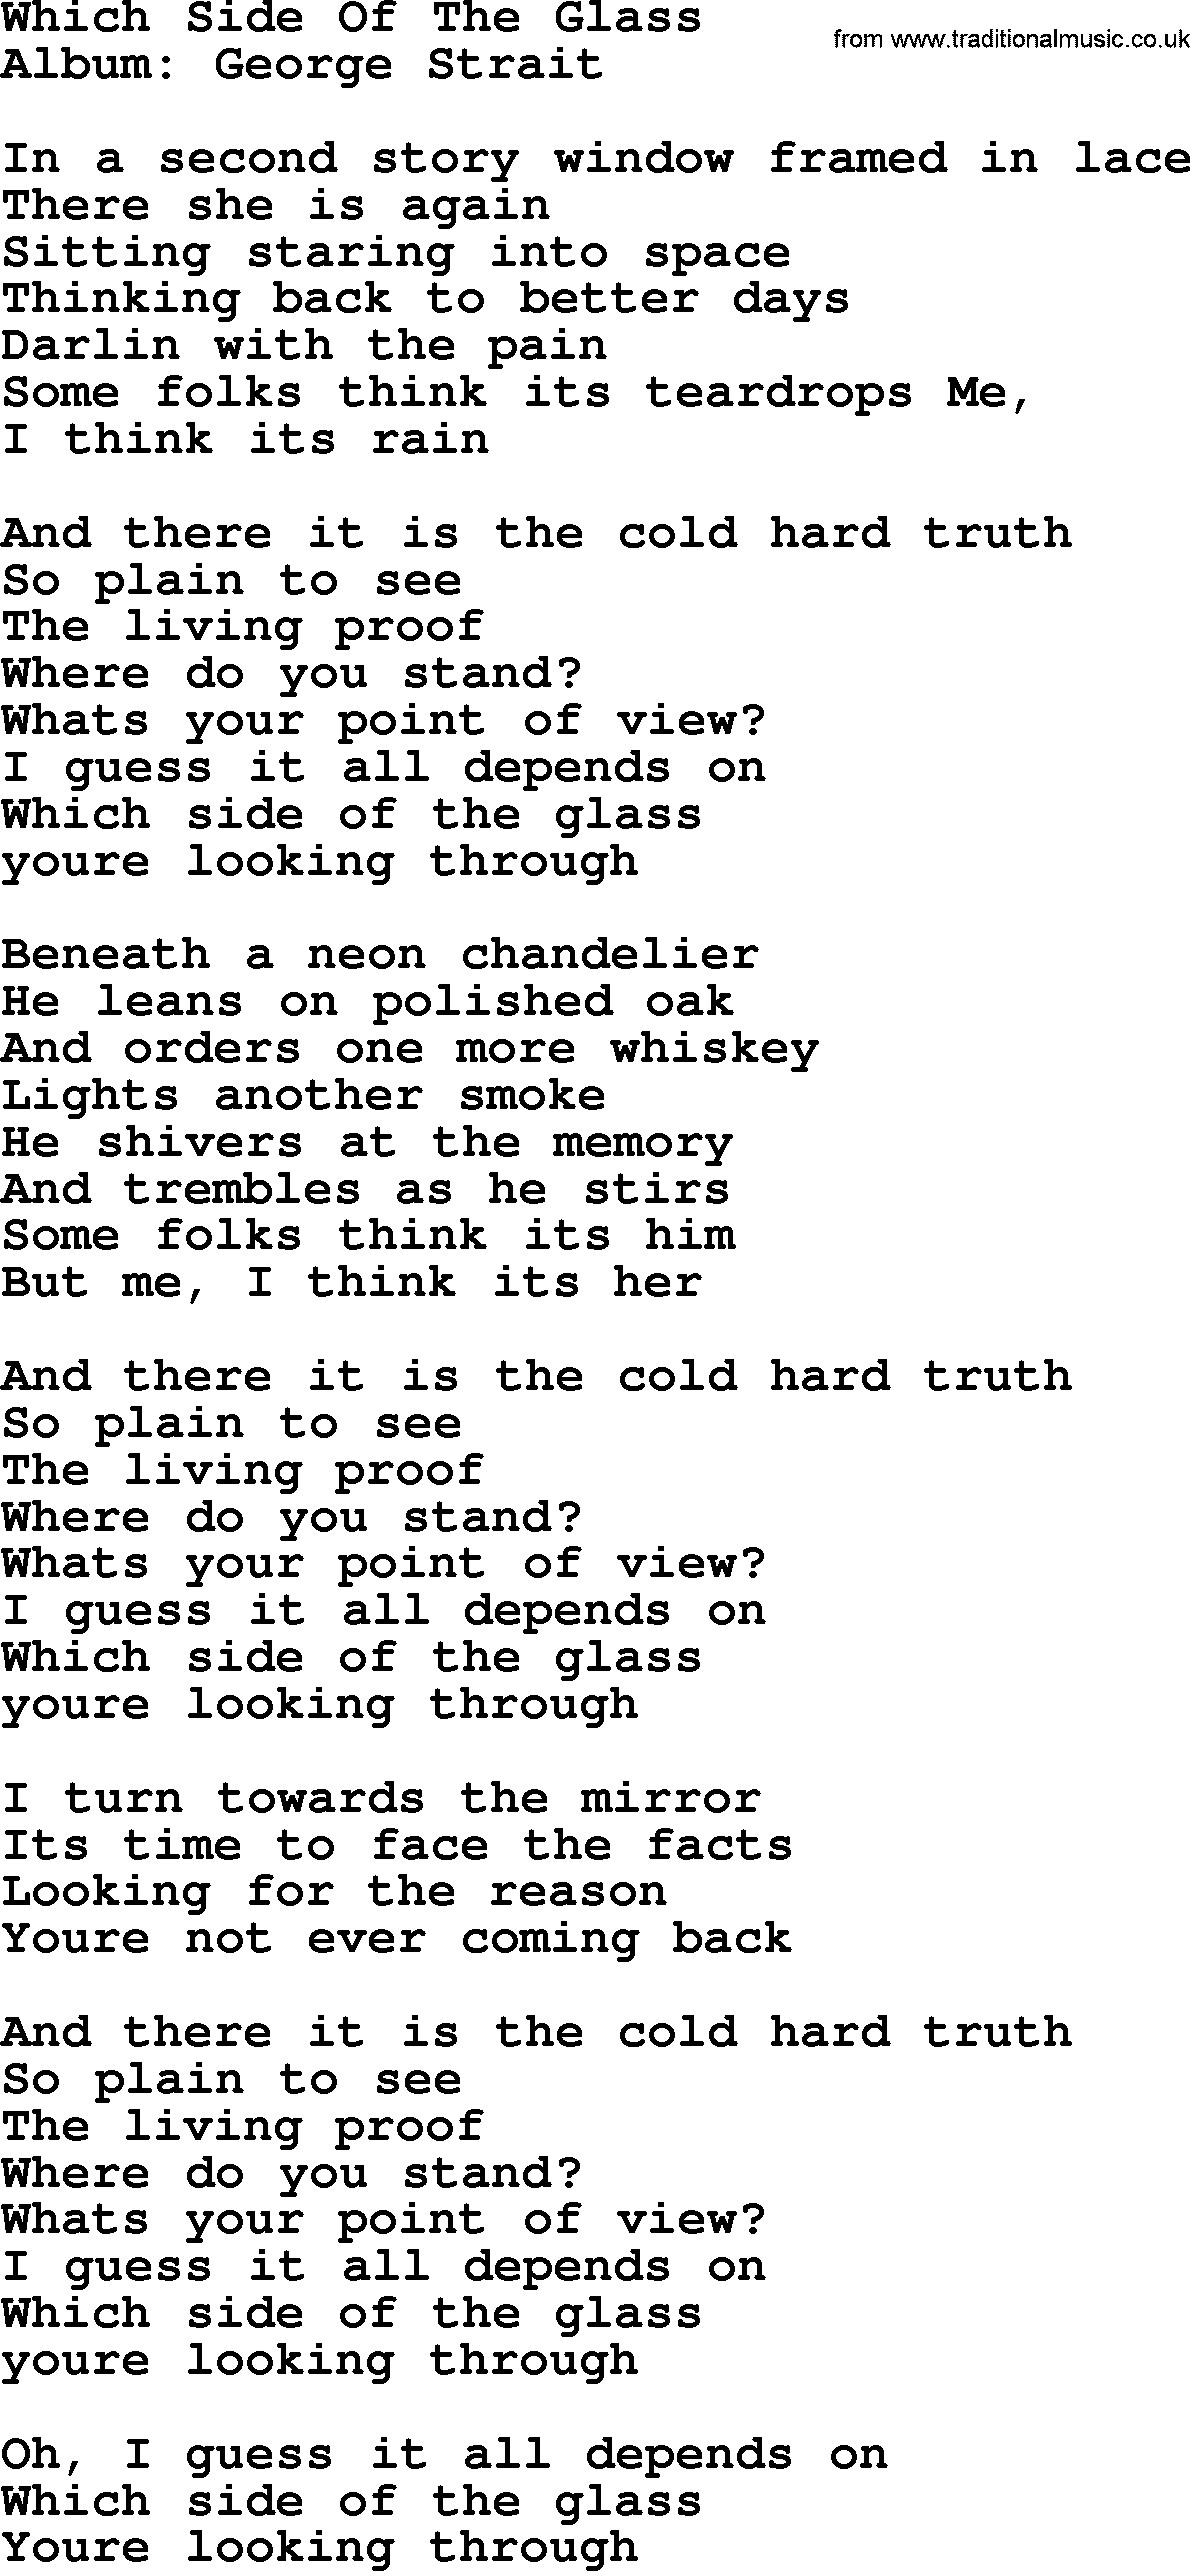 George Strait song: Which Side Of The Glass, lyrics